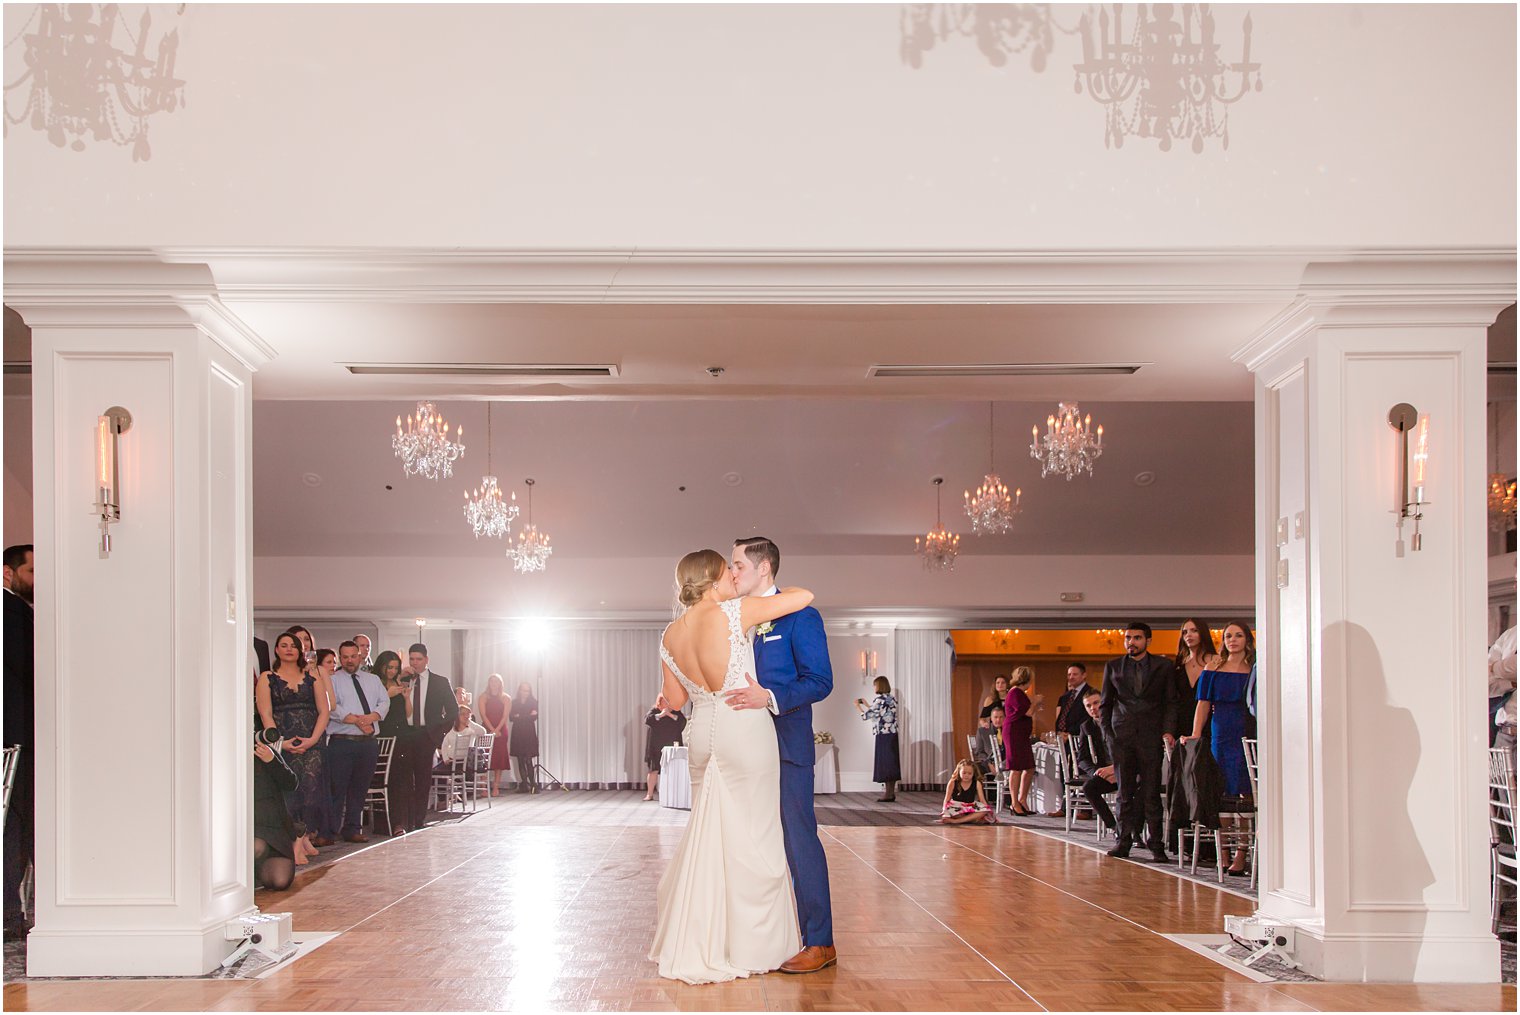 Idalia Photography captures first dance at New York Country Club